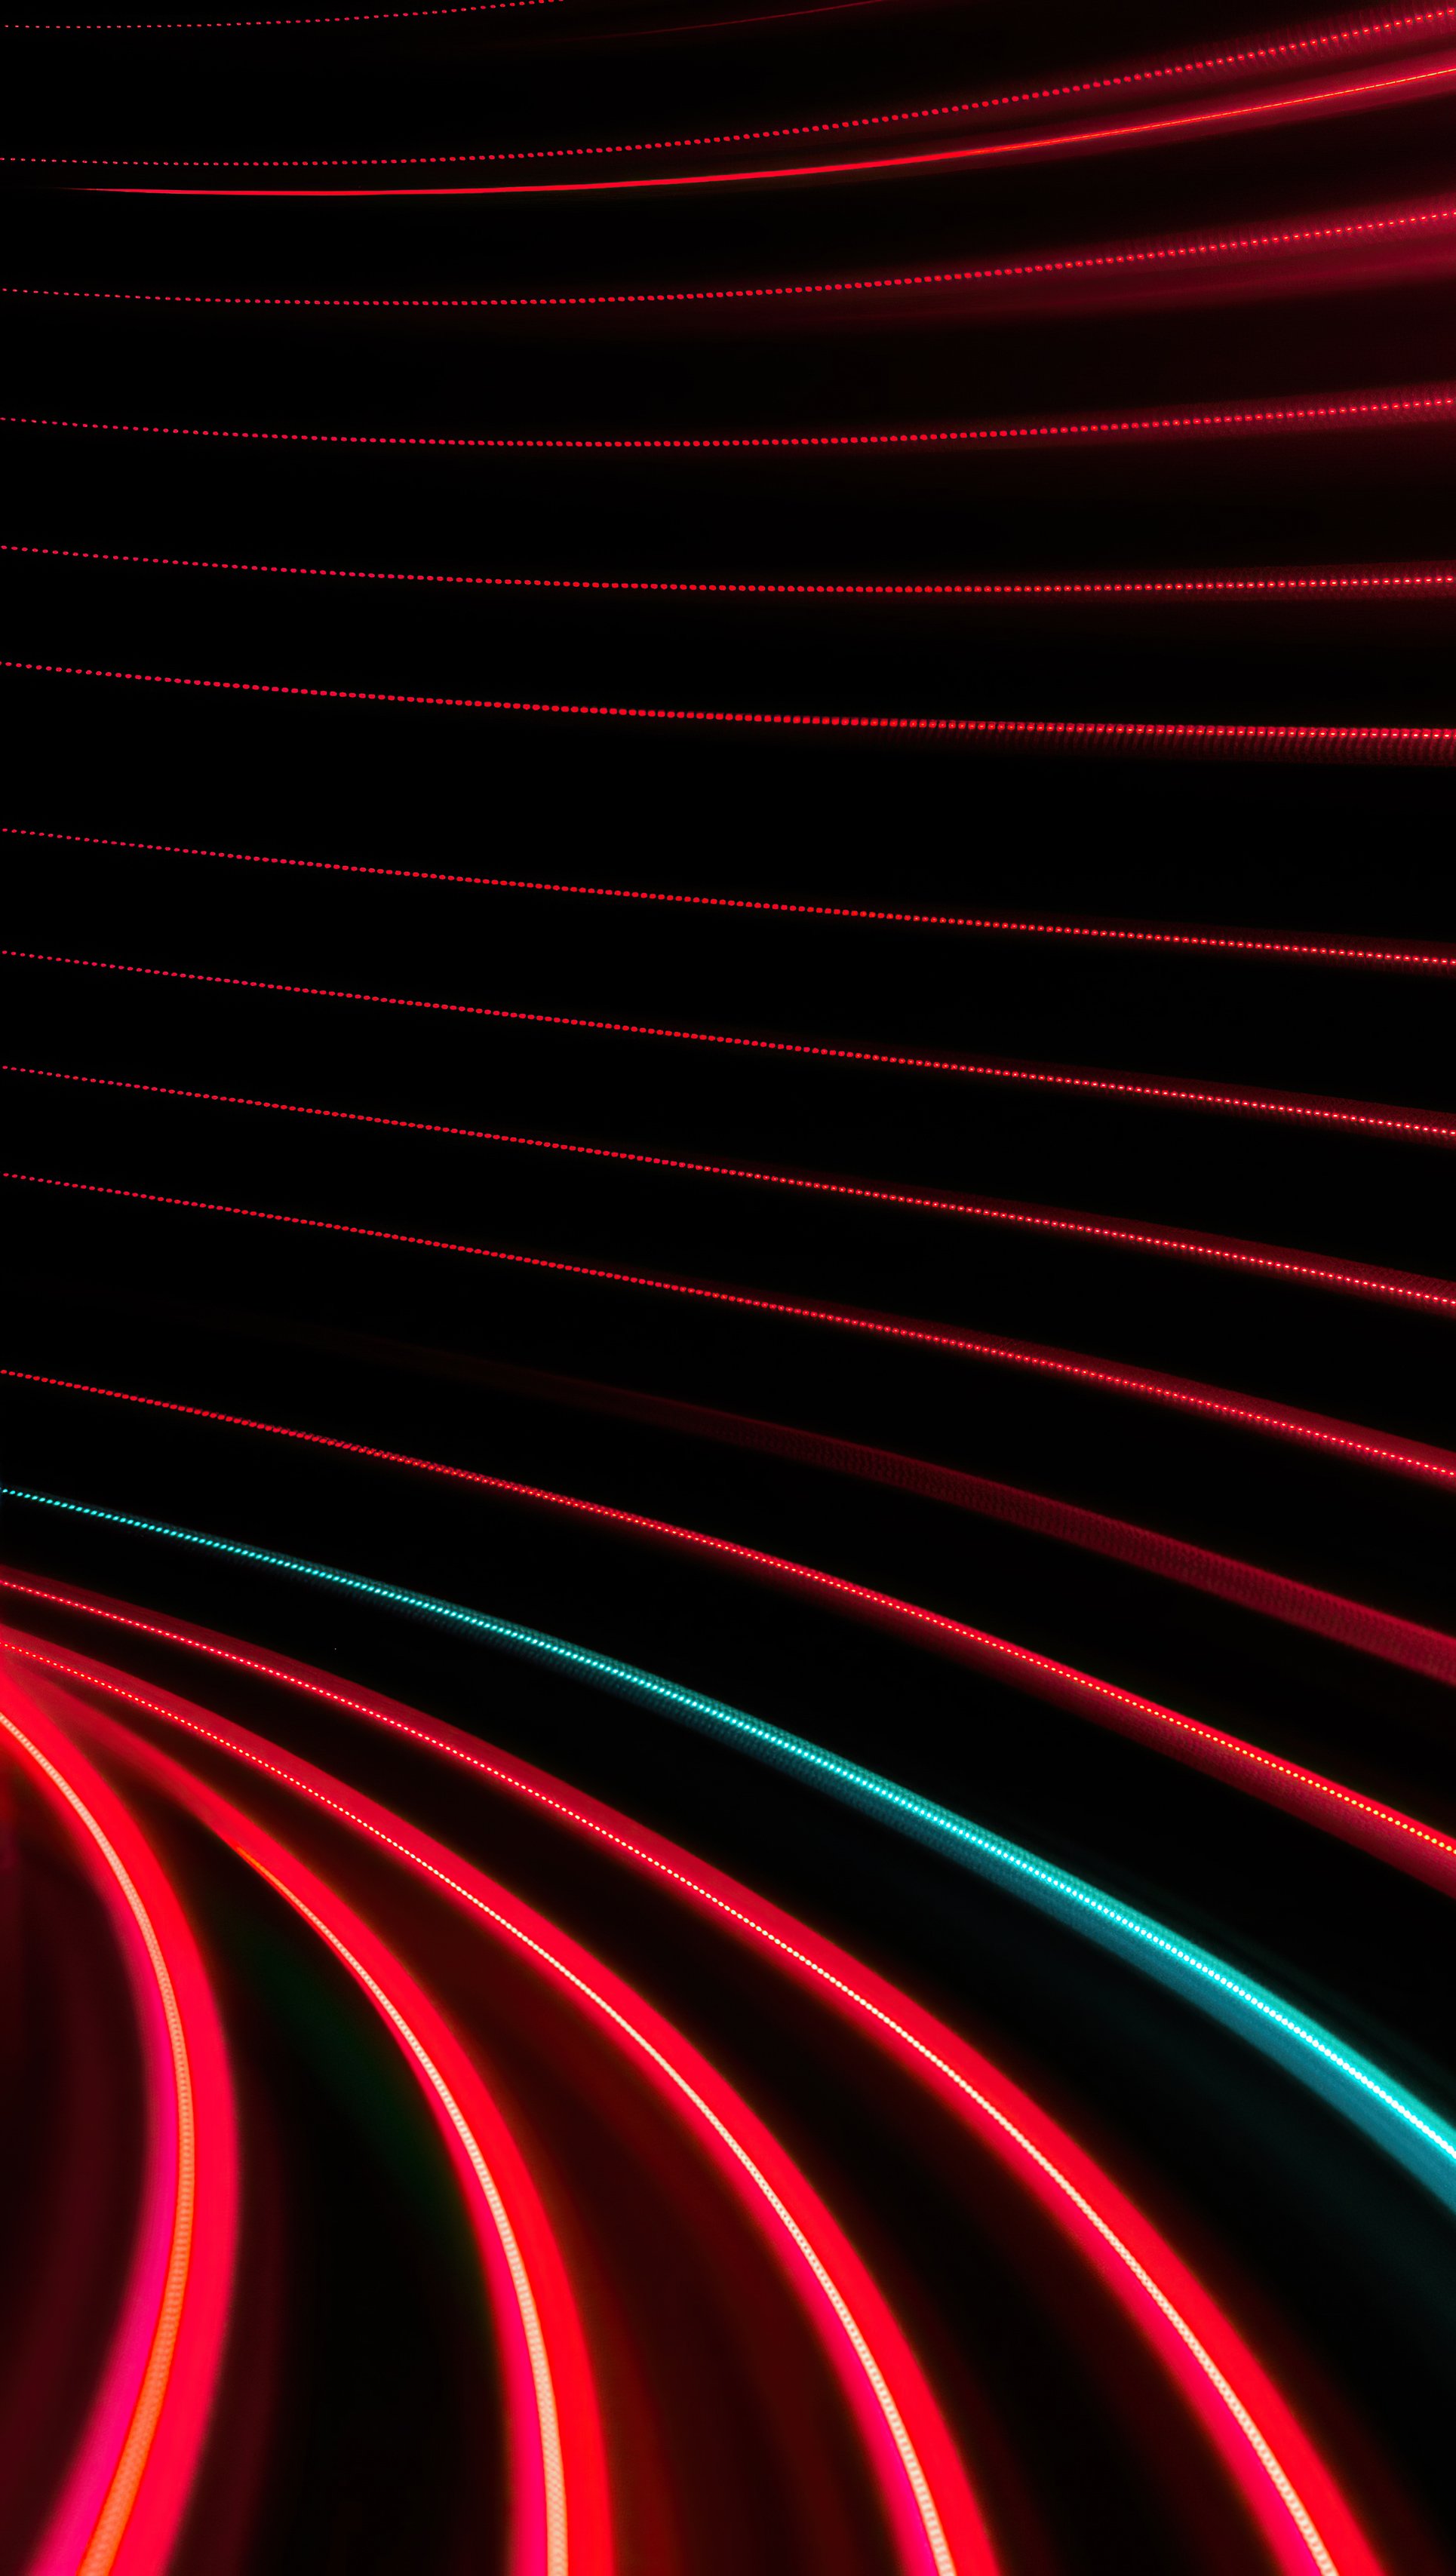 Swirl of red and black lines Wallpaper 5k Ultra HD ID:7408